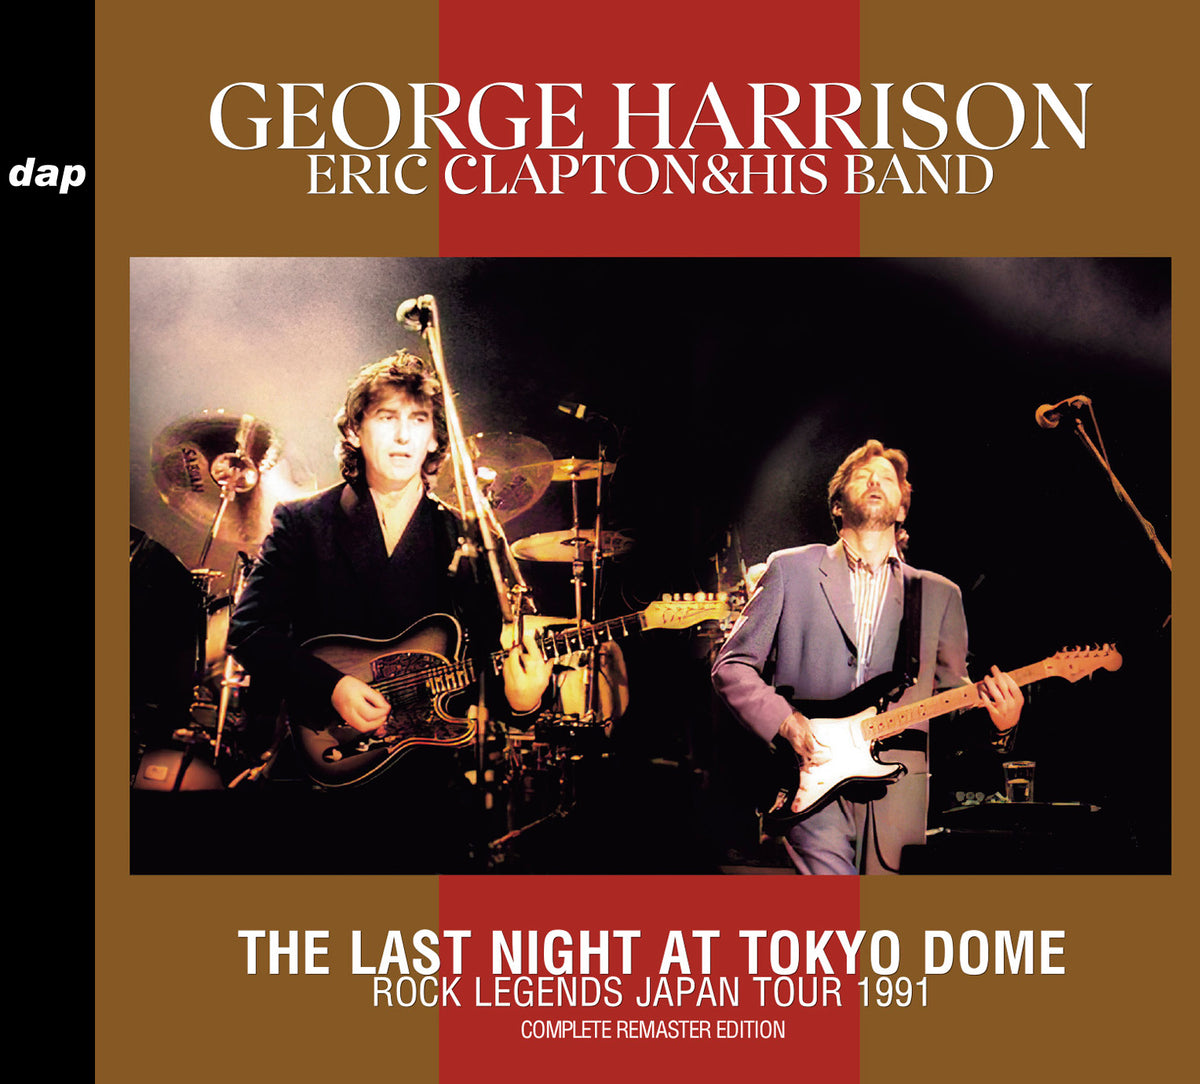 GEORGE HARRISON : ERIC CLAPTON u0026 HIS BAND - THE LAST NIGHT AT TOKYO DO